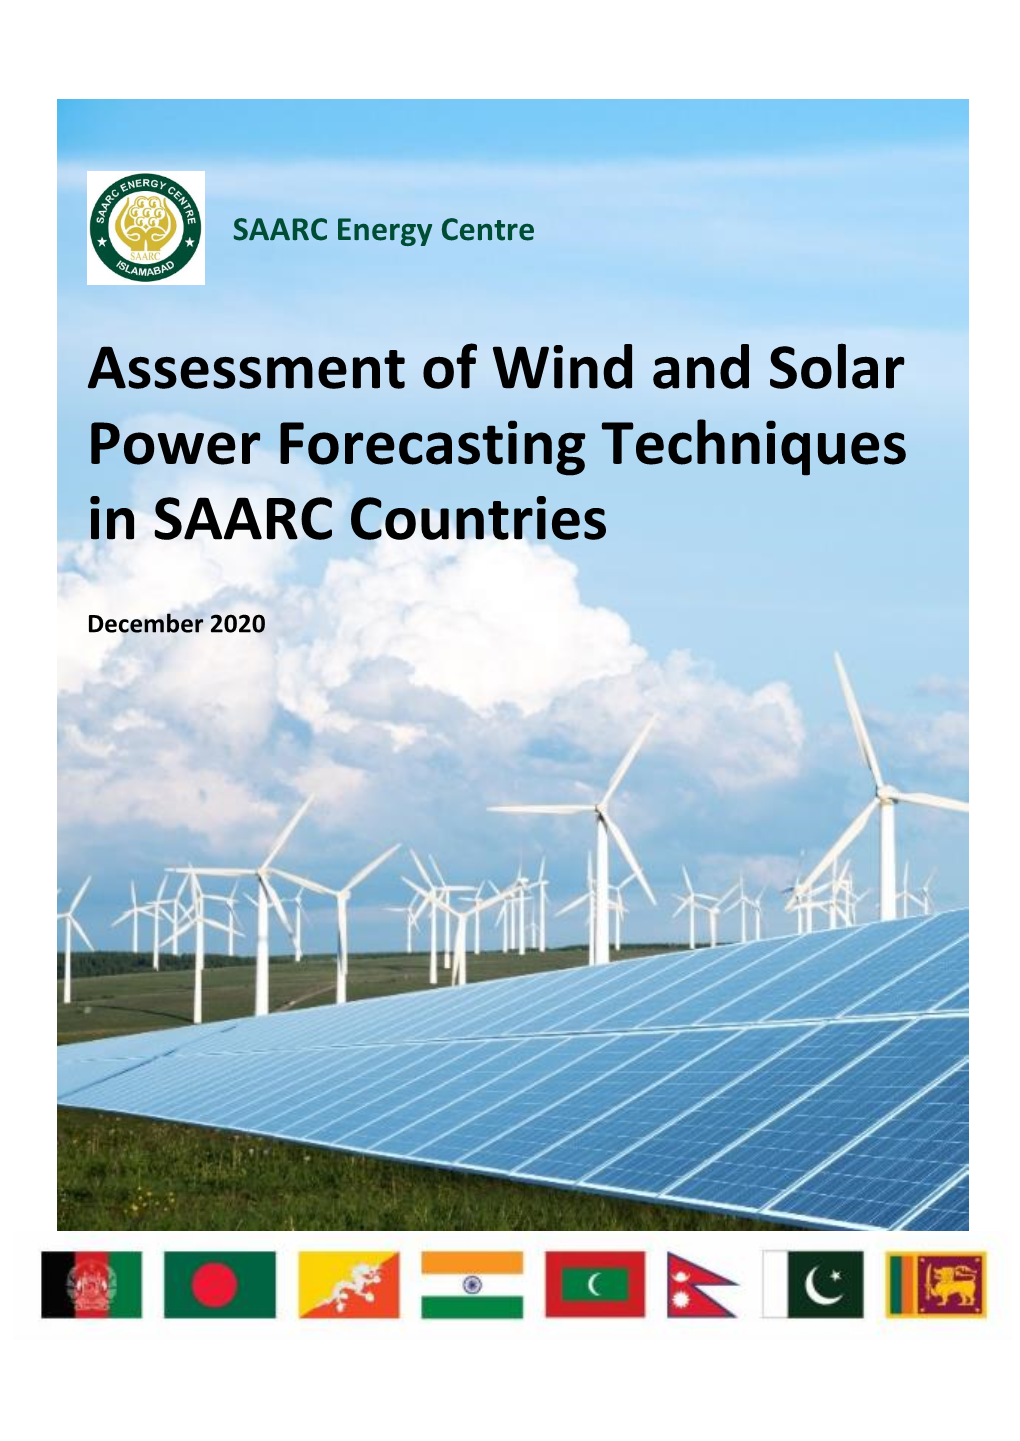 Assessment of Wind and Solar Power Forecasting Techniques in SAARC Countries